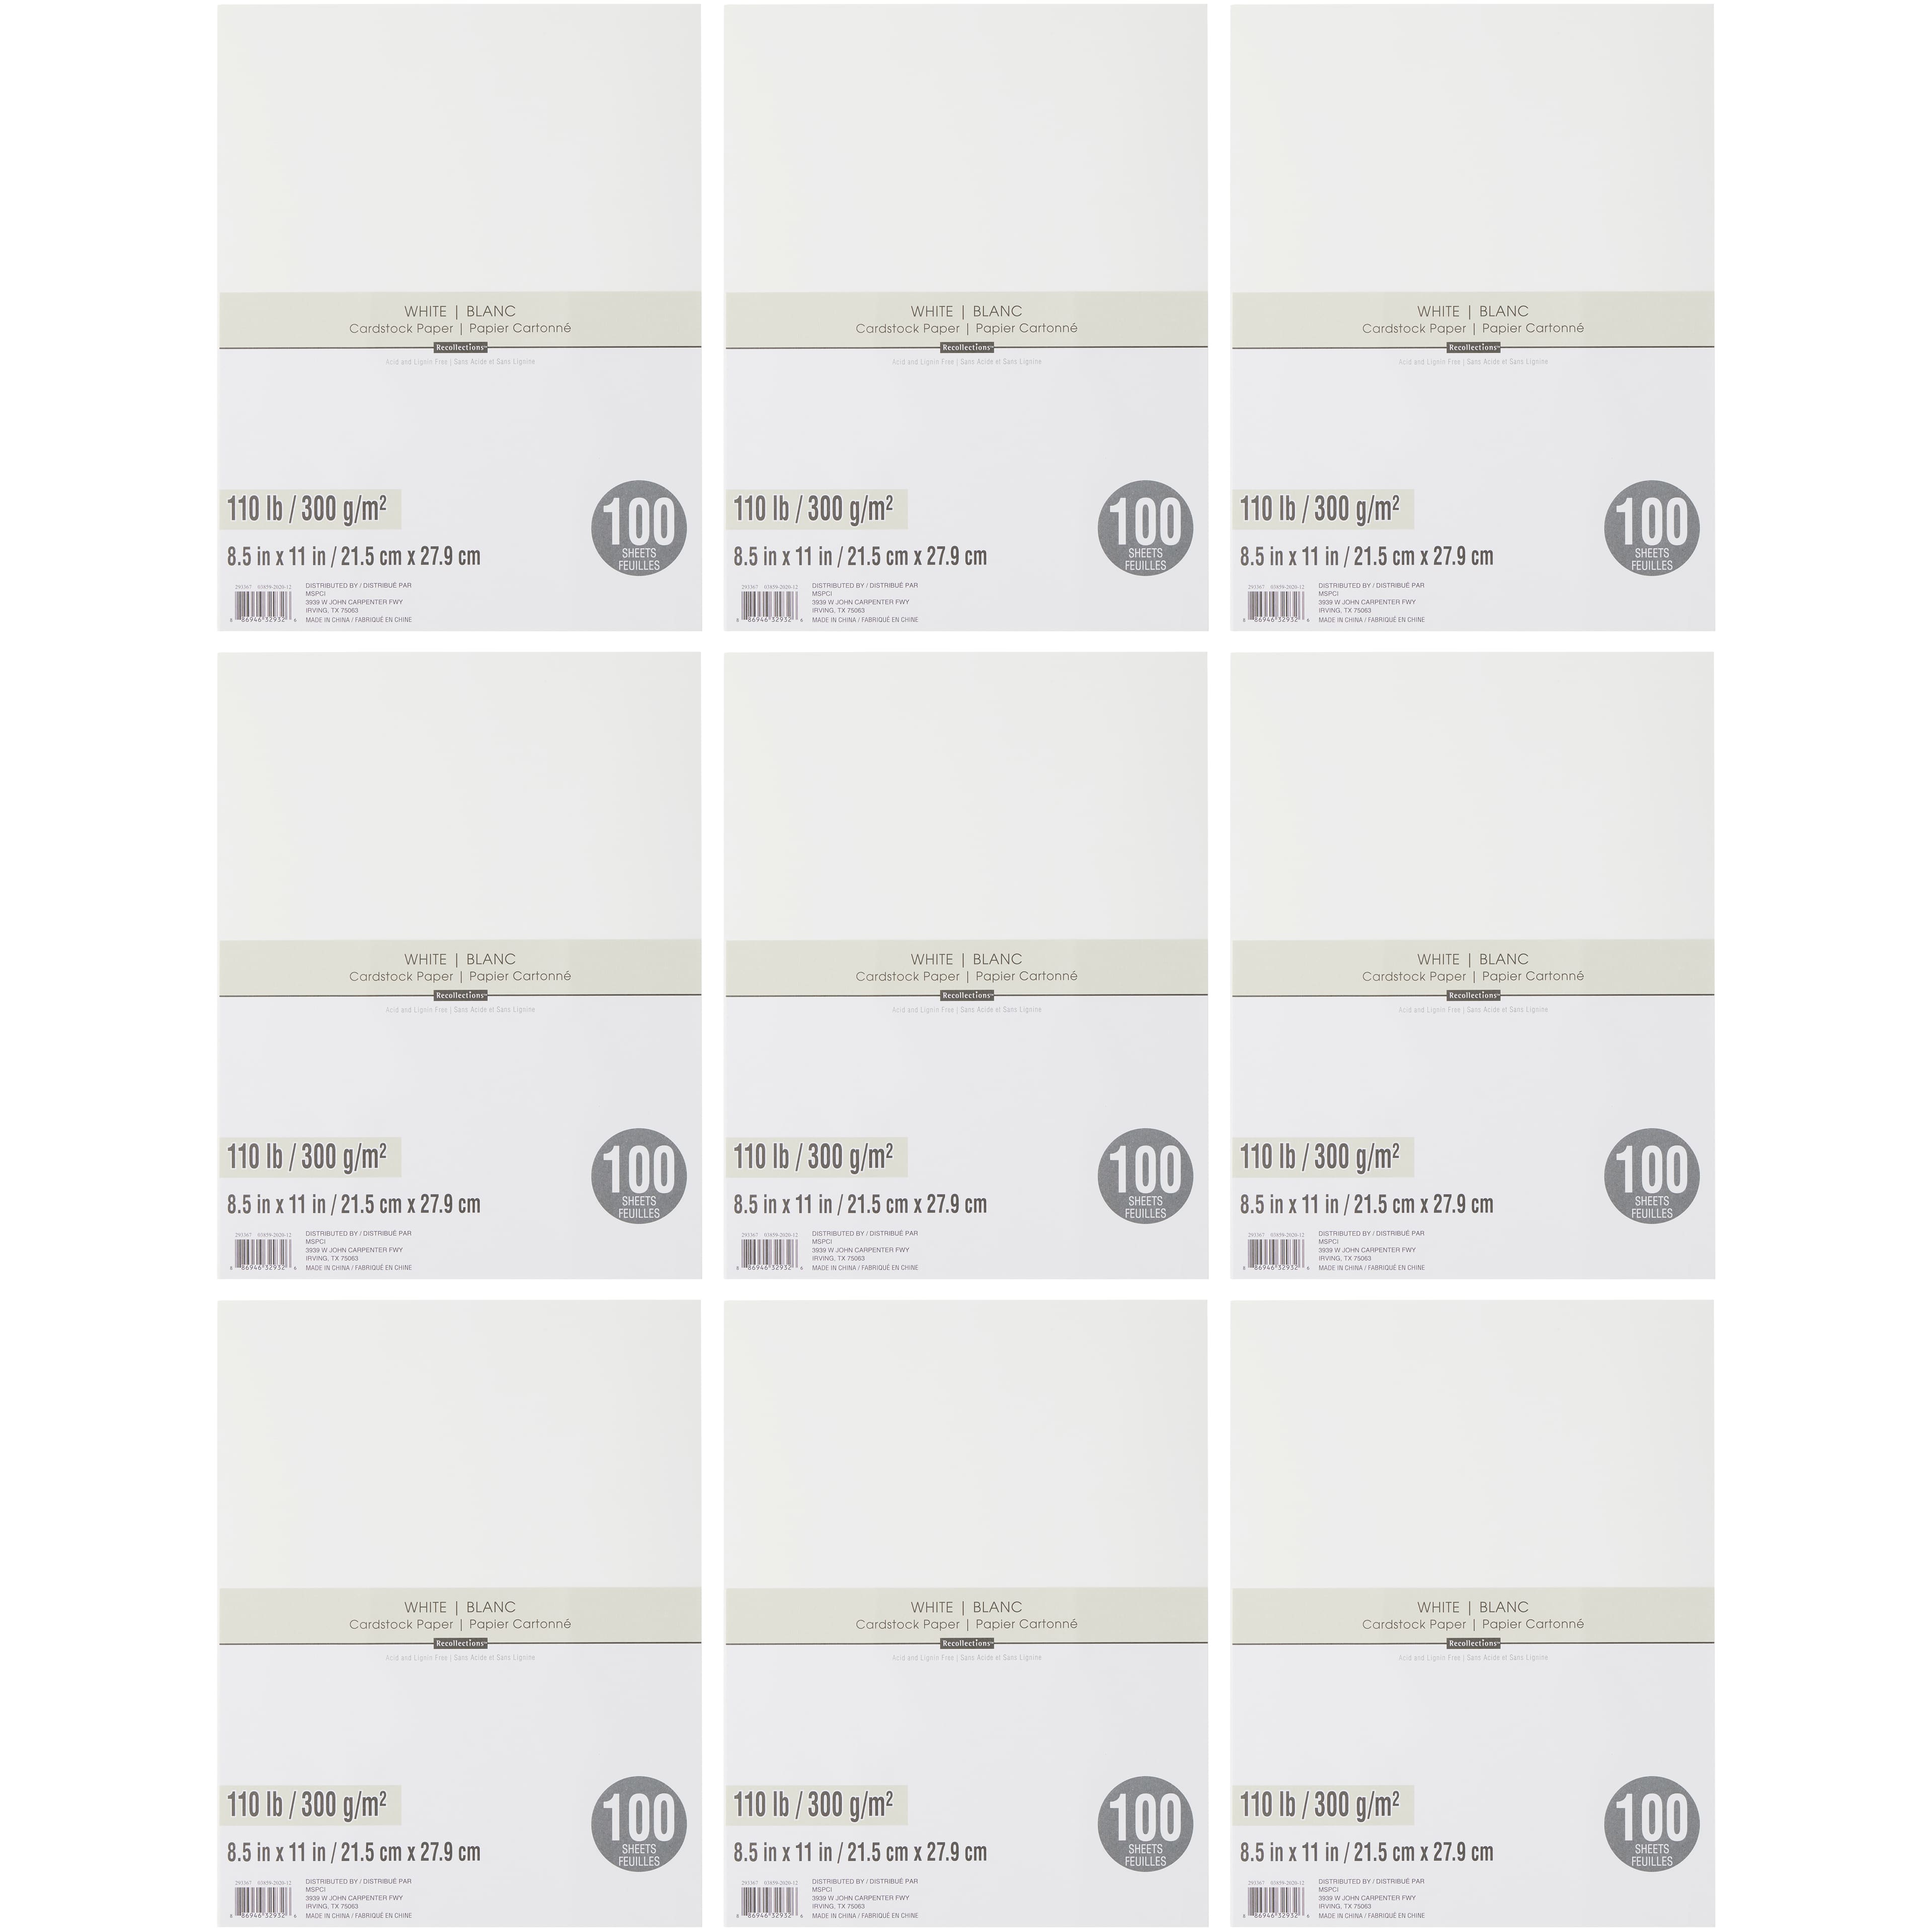 12 Packs: 50 ct. (600 total) White Dove 8.5 x 11 Cardstock Paper by  Recollections™